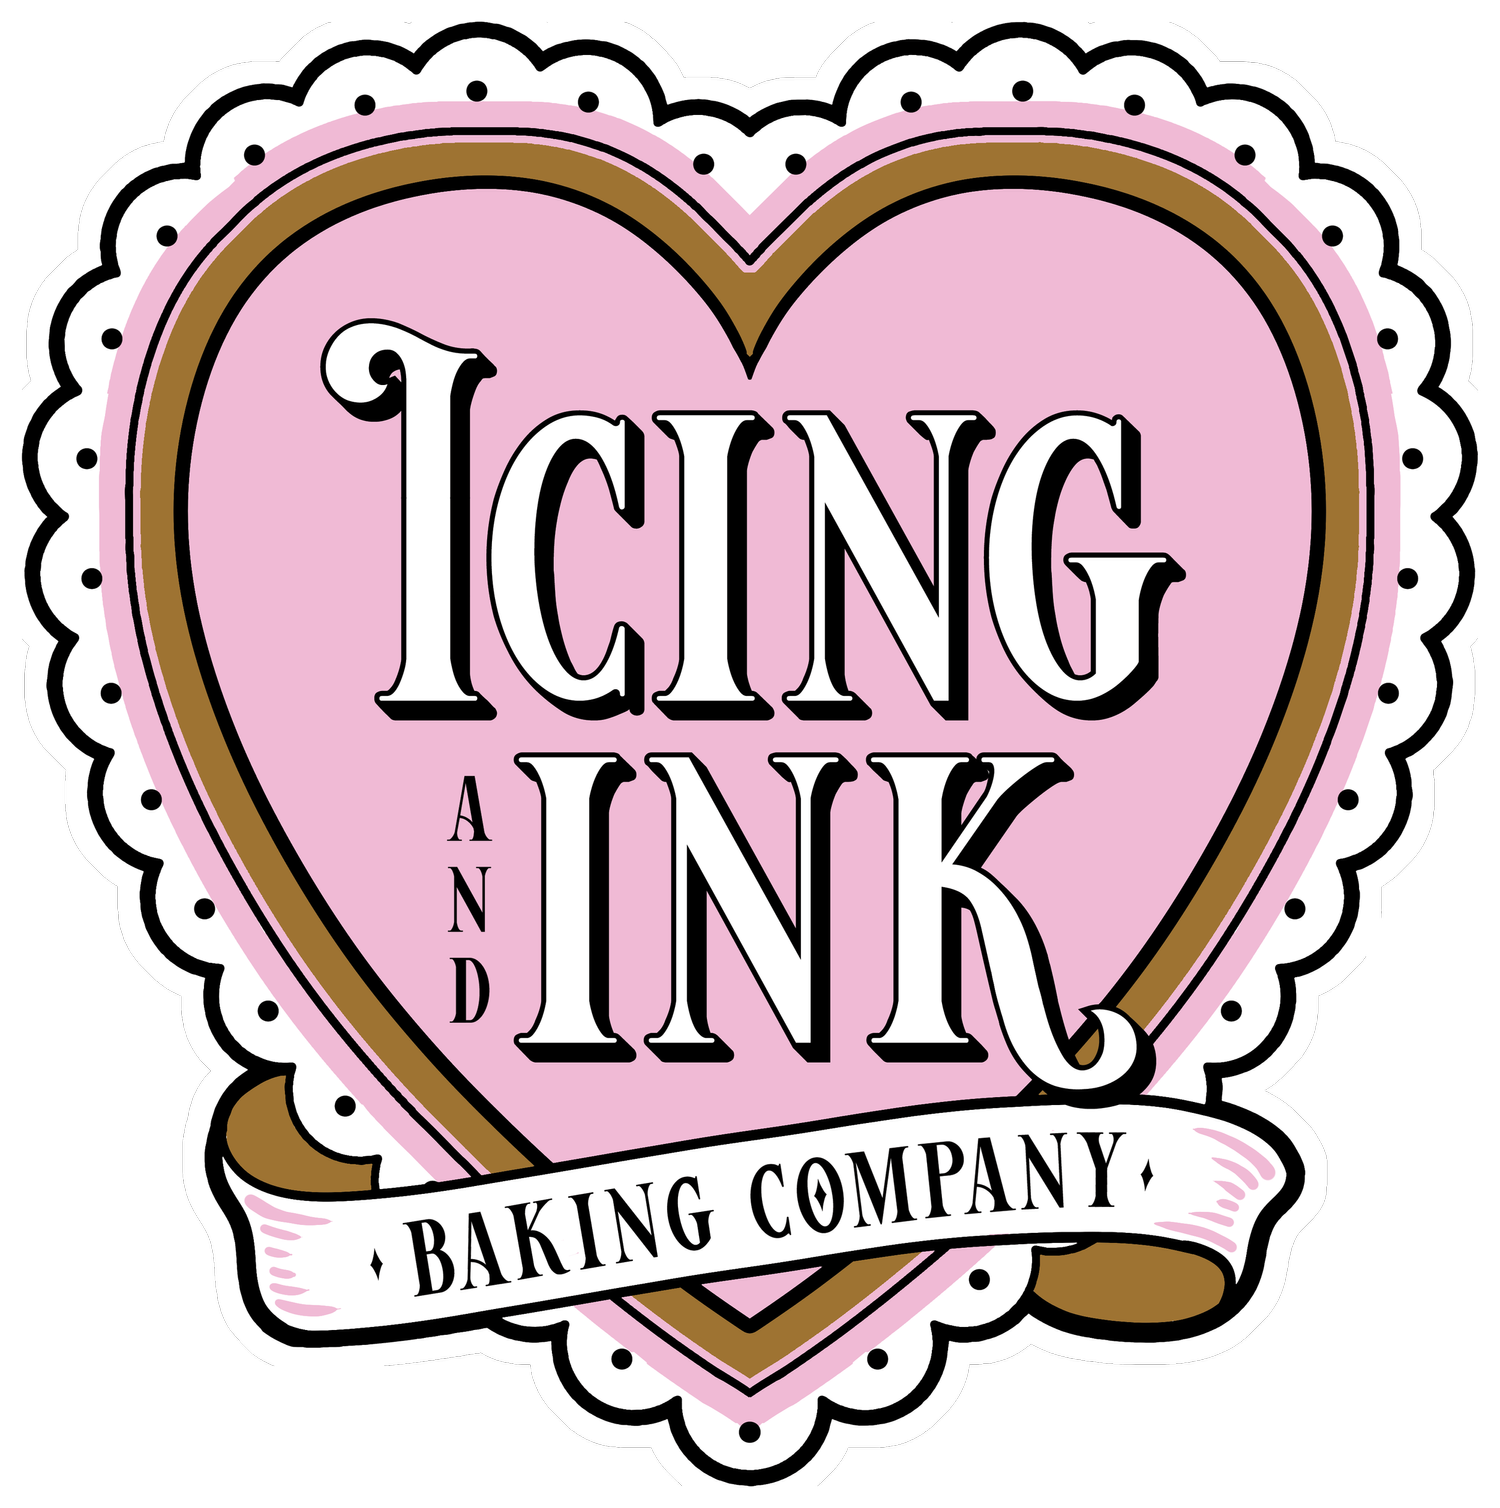 Icing and Ink Baking Company